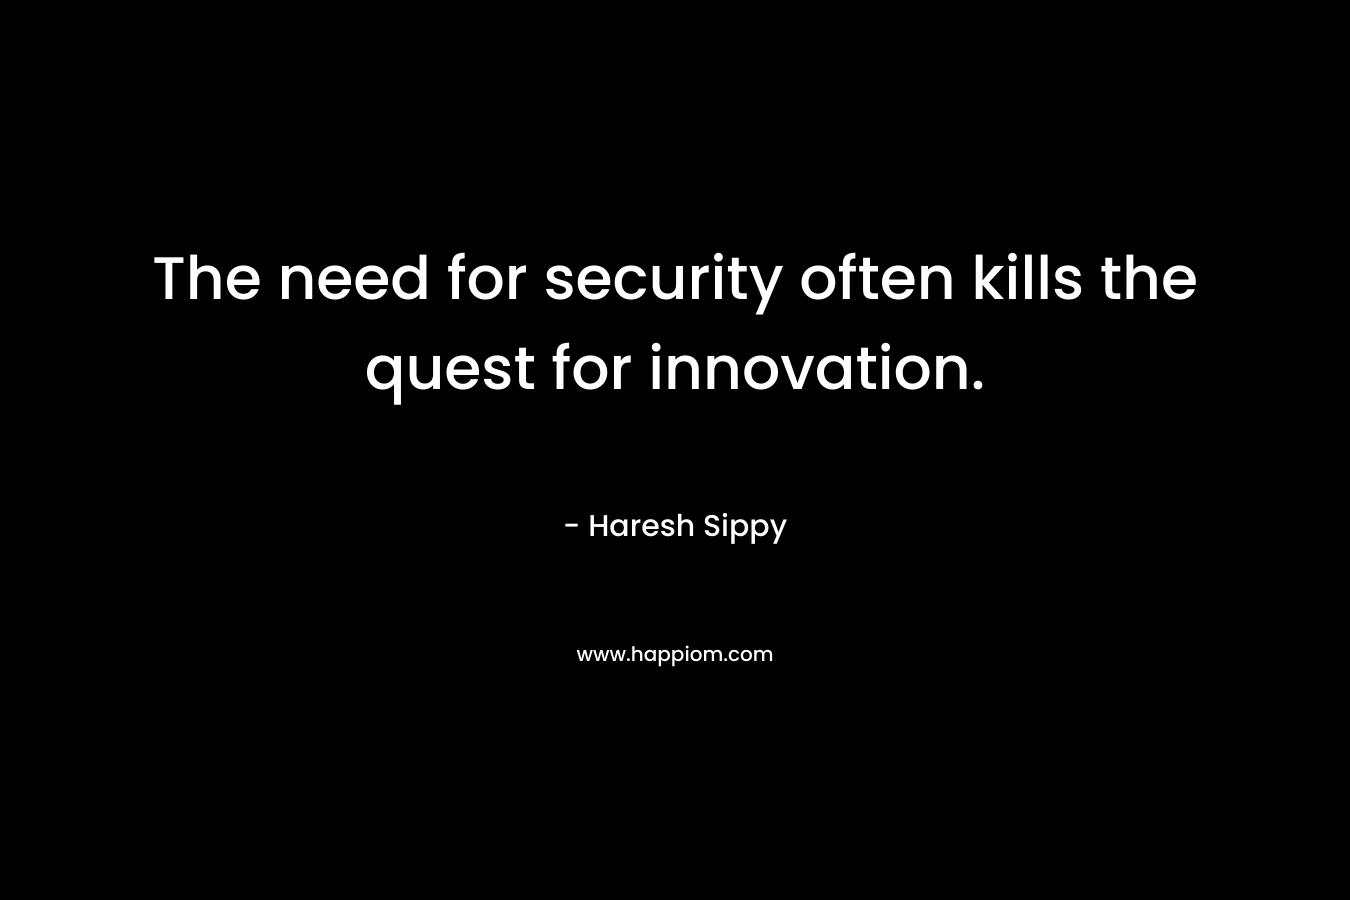 The need for security often kills the quest for innovation. – Haresh Sippy